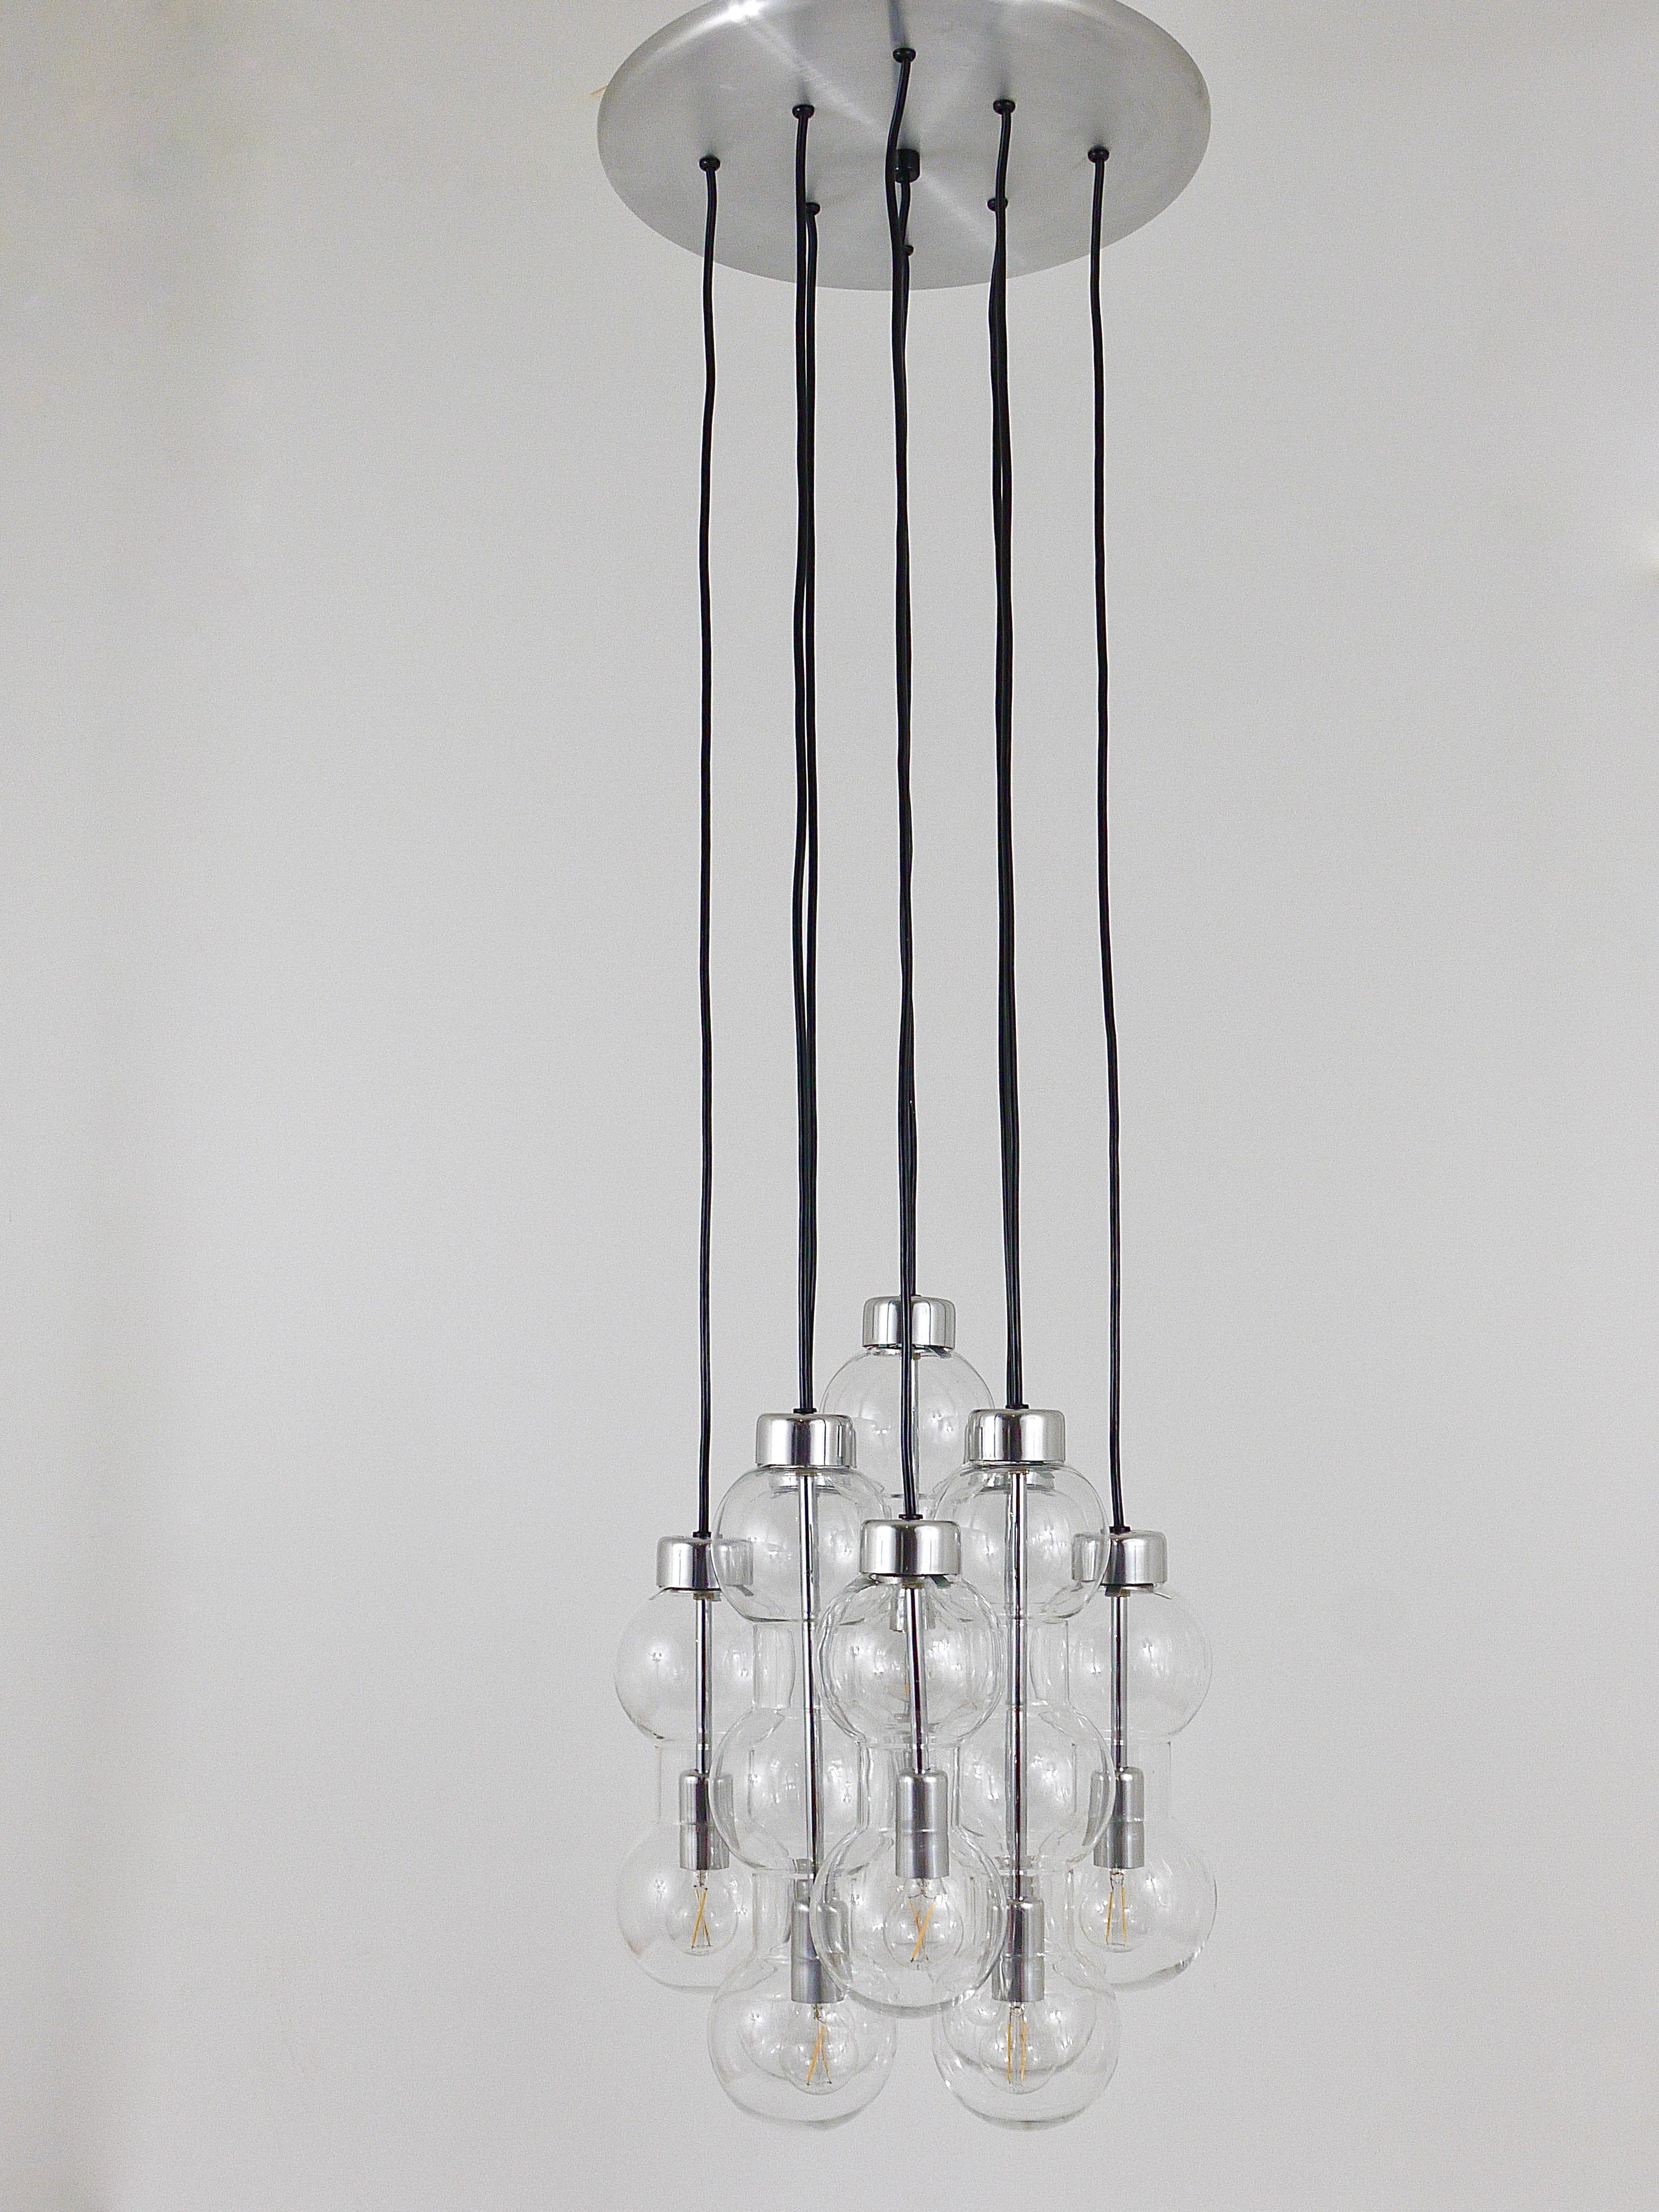 A beautiful large Cascade chandelier / pendant lamp from the 1960s, executed by Doria, Germany. This impressive chandelier has nine cascading strands with five double and four triple hourglass-shaped clear glass bubble shades on a chrome-plated